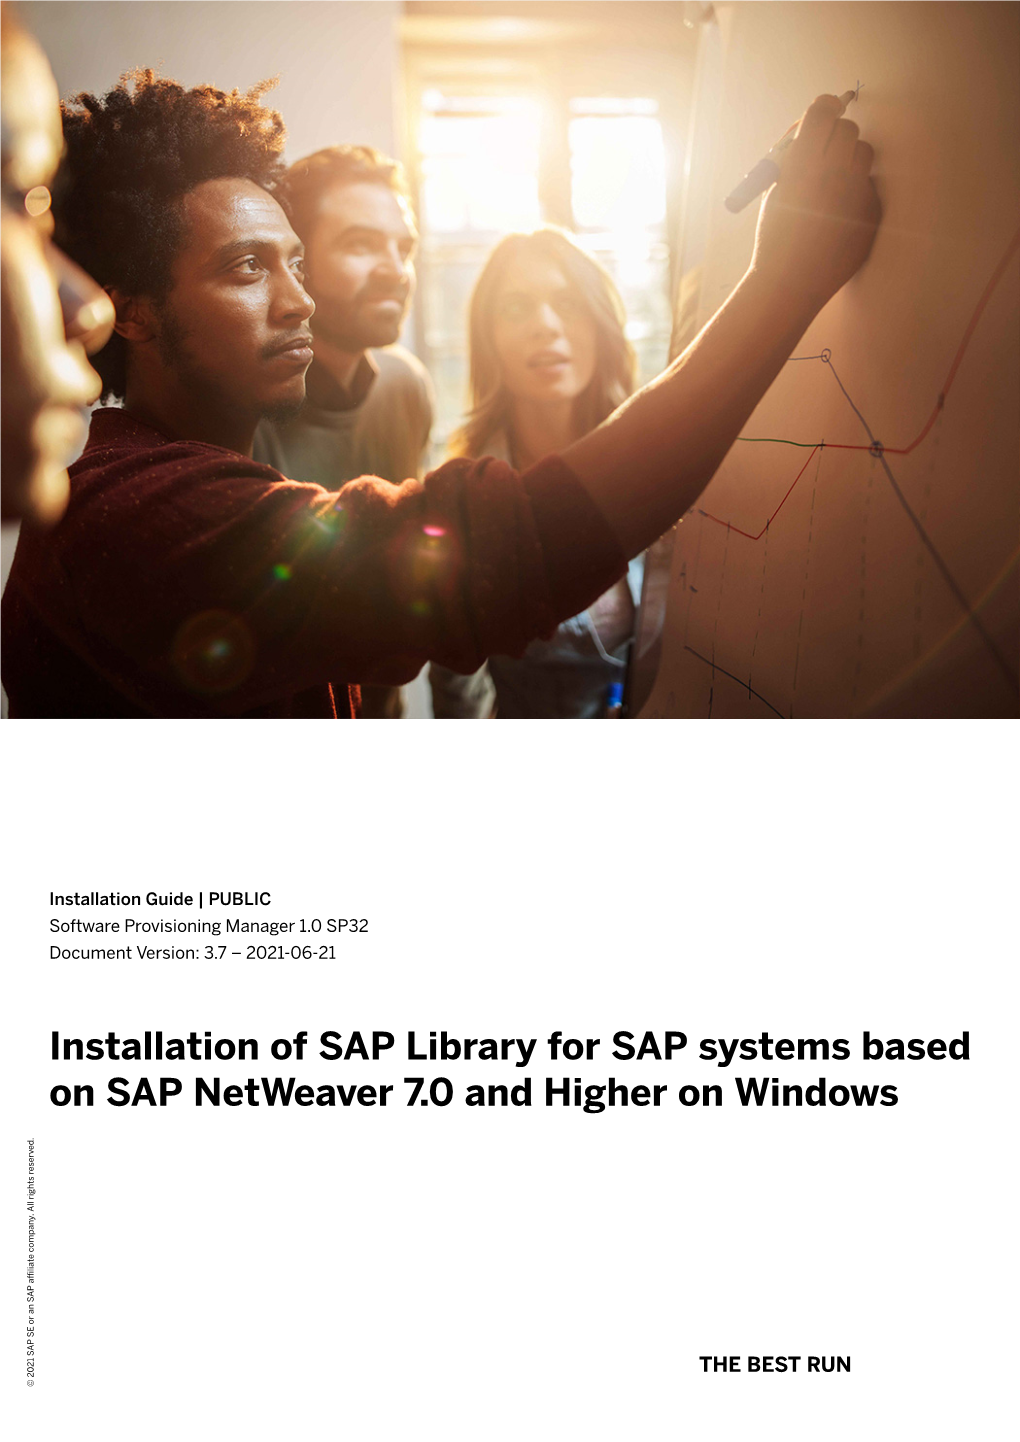 Installation of SAP Library for SAP Systems Based on SAP Netweaver 7.0 and Higher on Windows Company